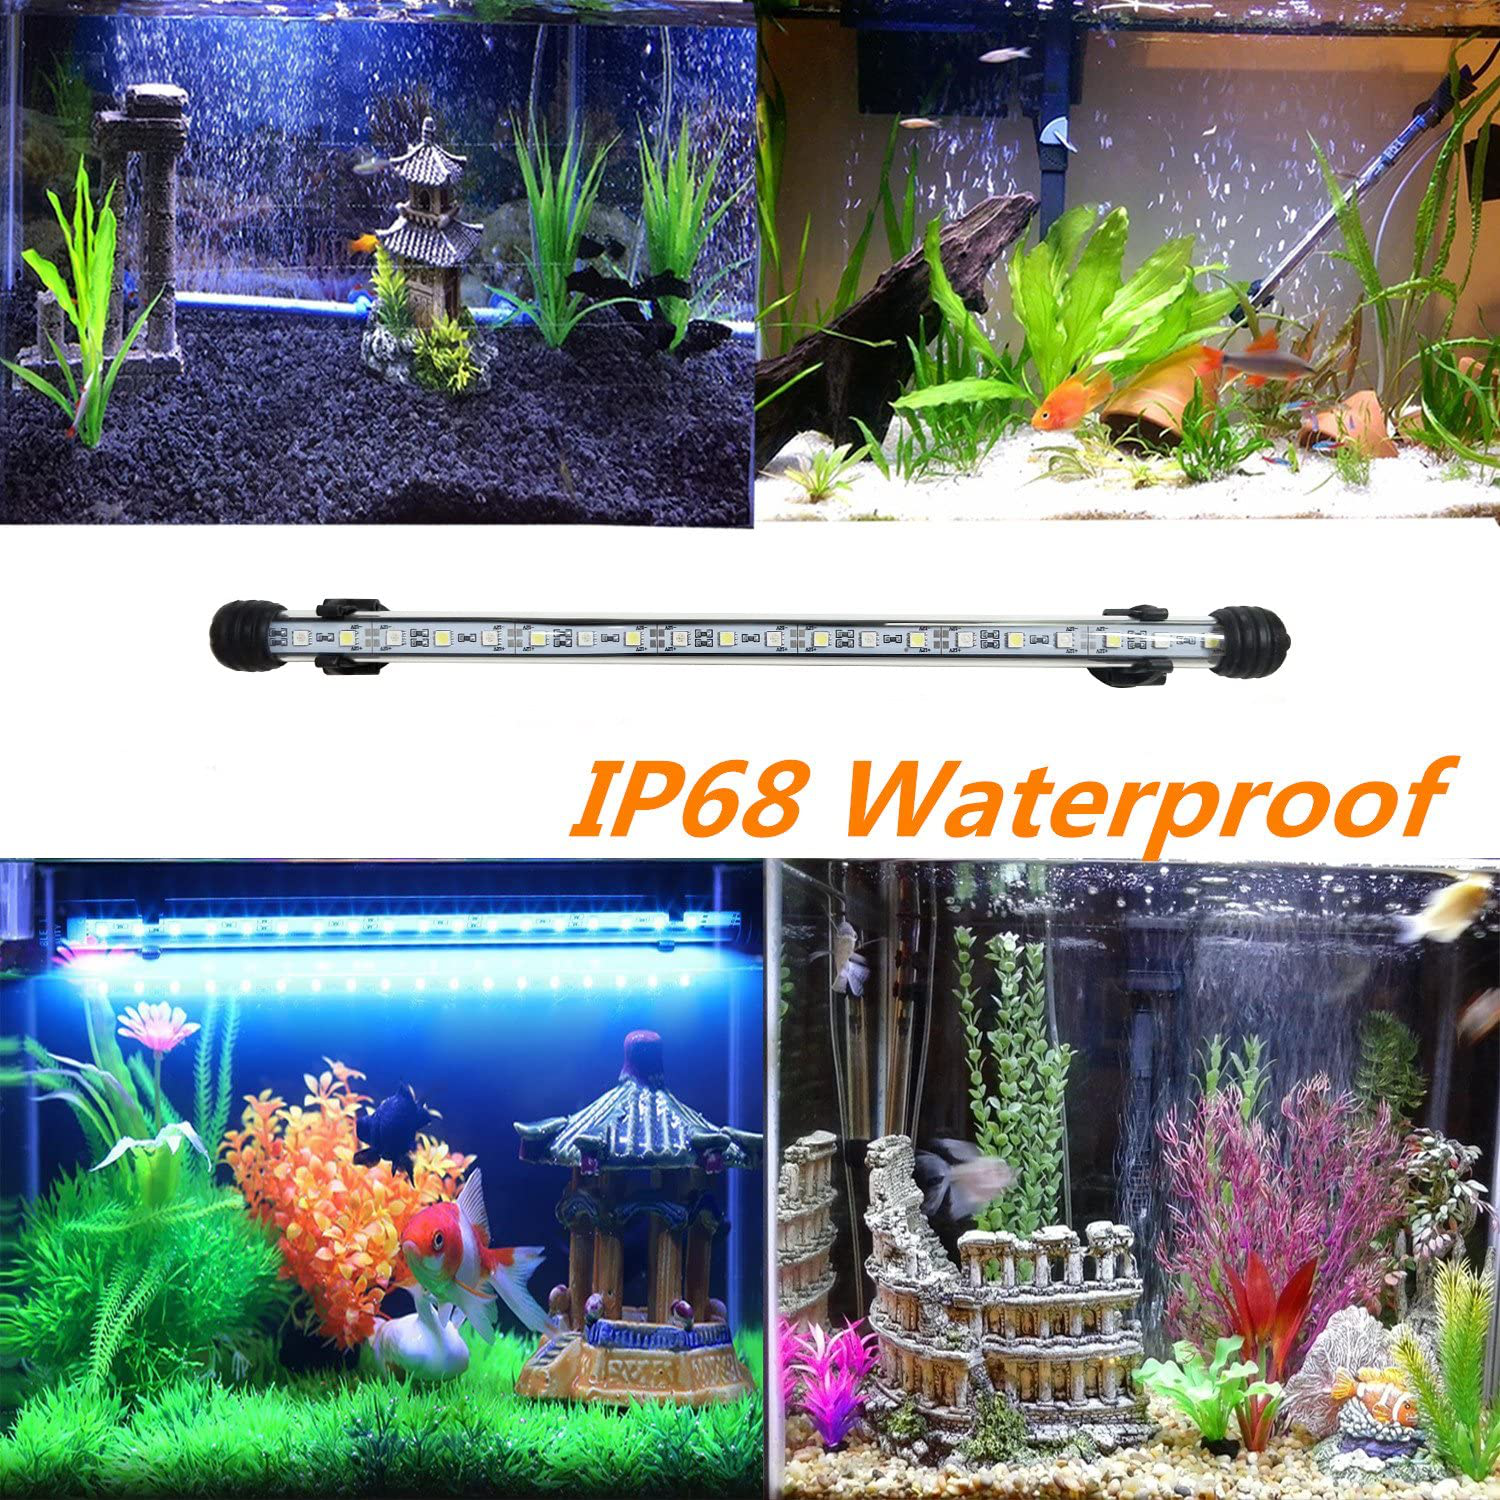 COVOART LED Aquarium Light, 15 Inches Fish Tank Light RGB Color Underwater Light Submersible Crystal Glass Lights, 21 LED Beads, Brightness Adjustable Memory Function